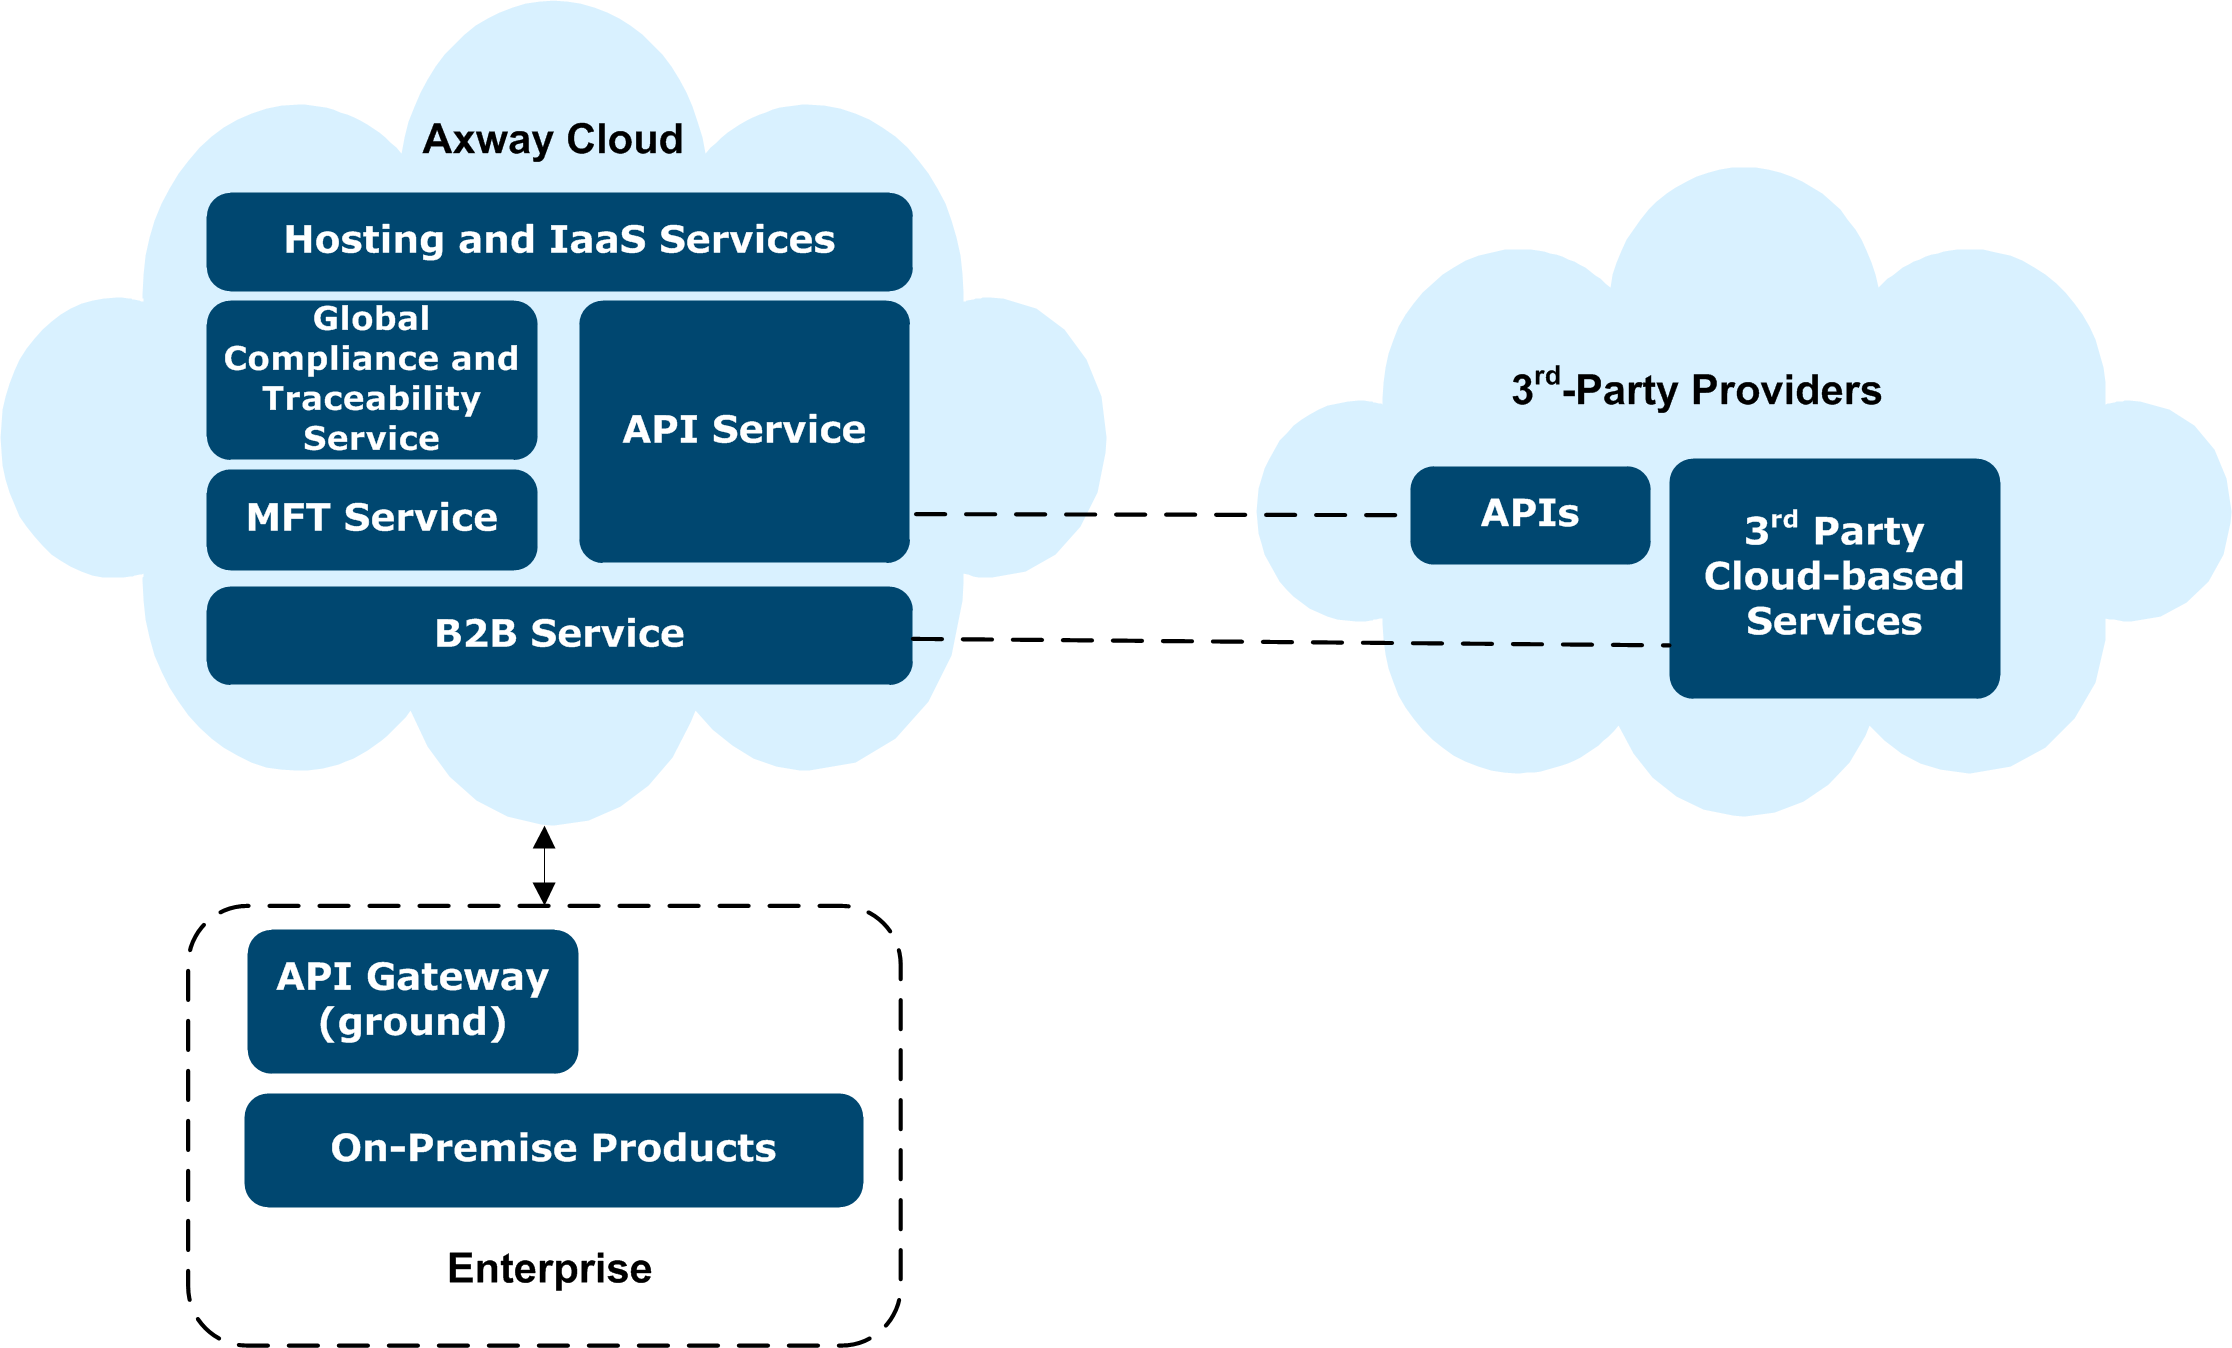 6 Axway Cloud Axway Cloud services This section describes the Axway Cloud services.